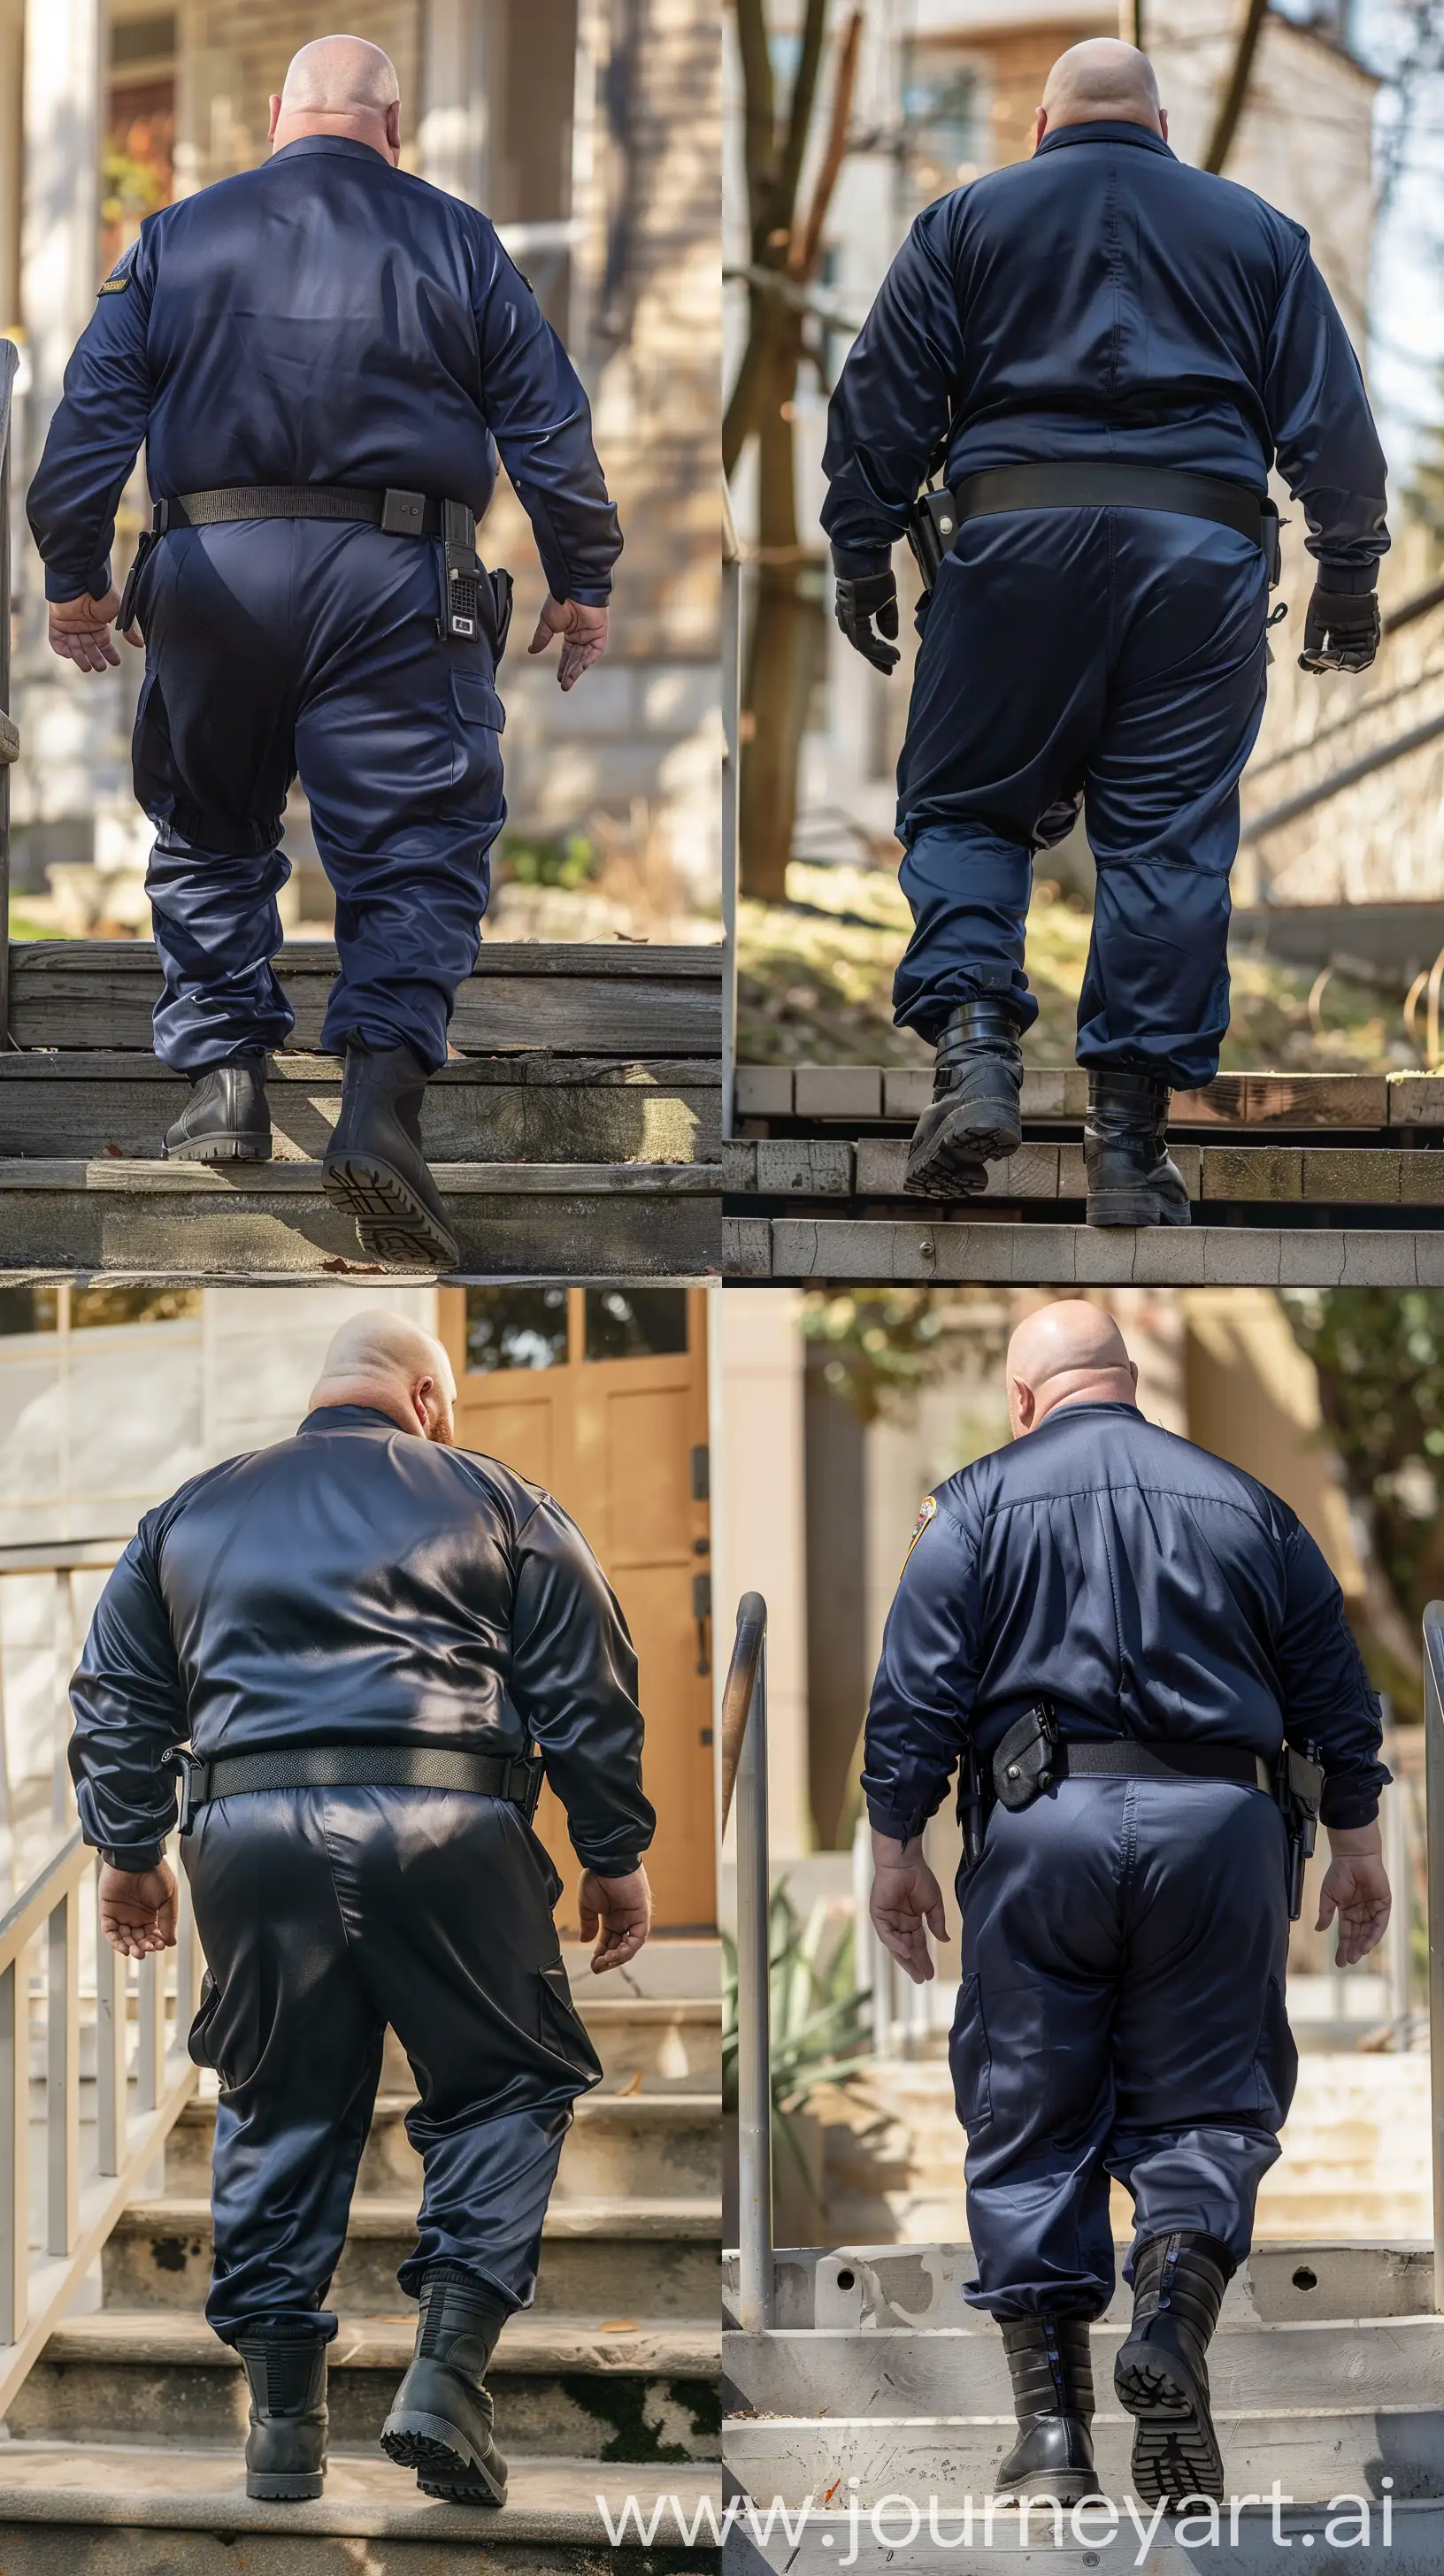 Senior-Security-Guard-Ascending-Stairs-in-Navy-Coverall